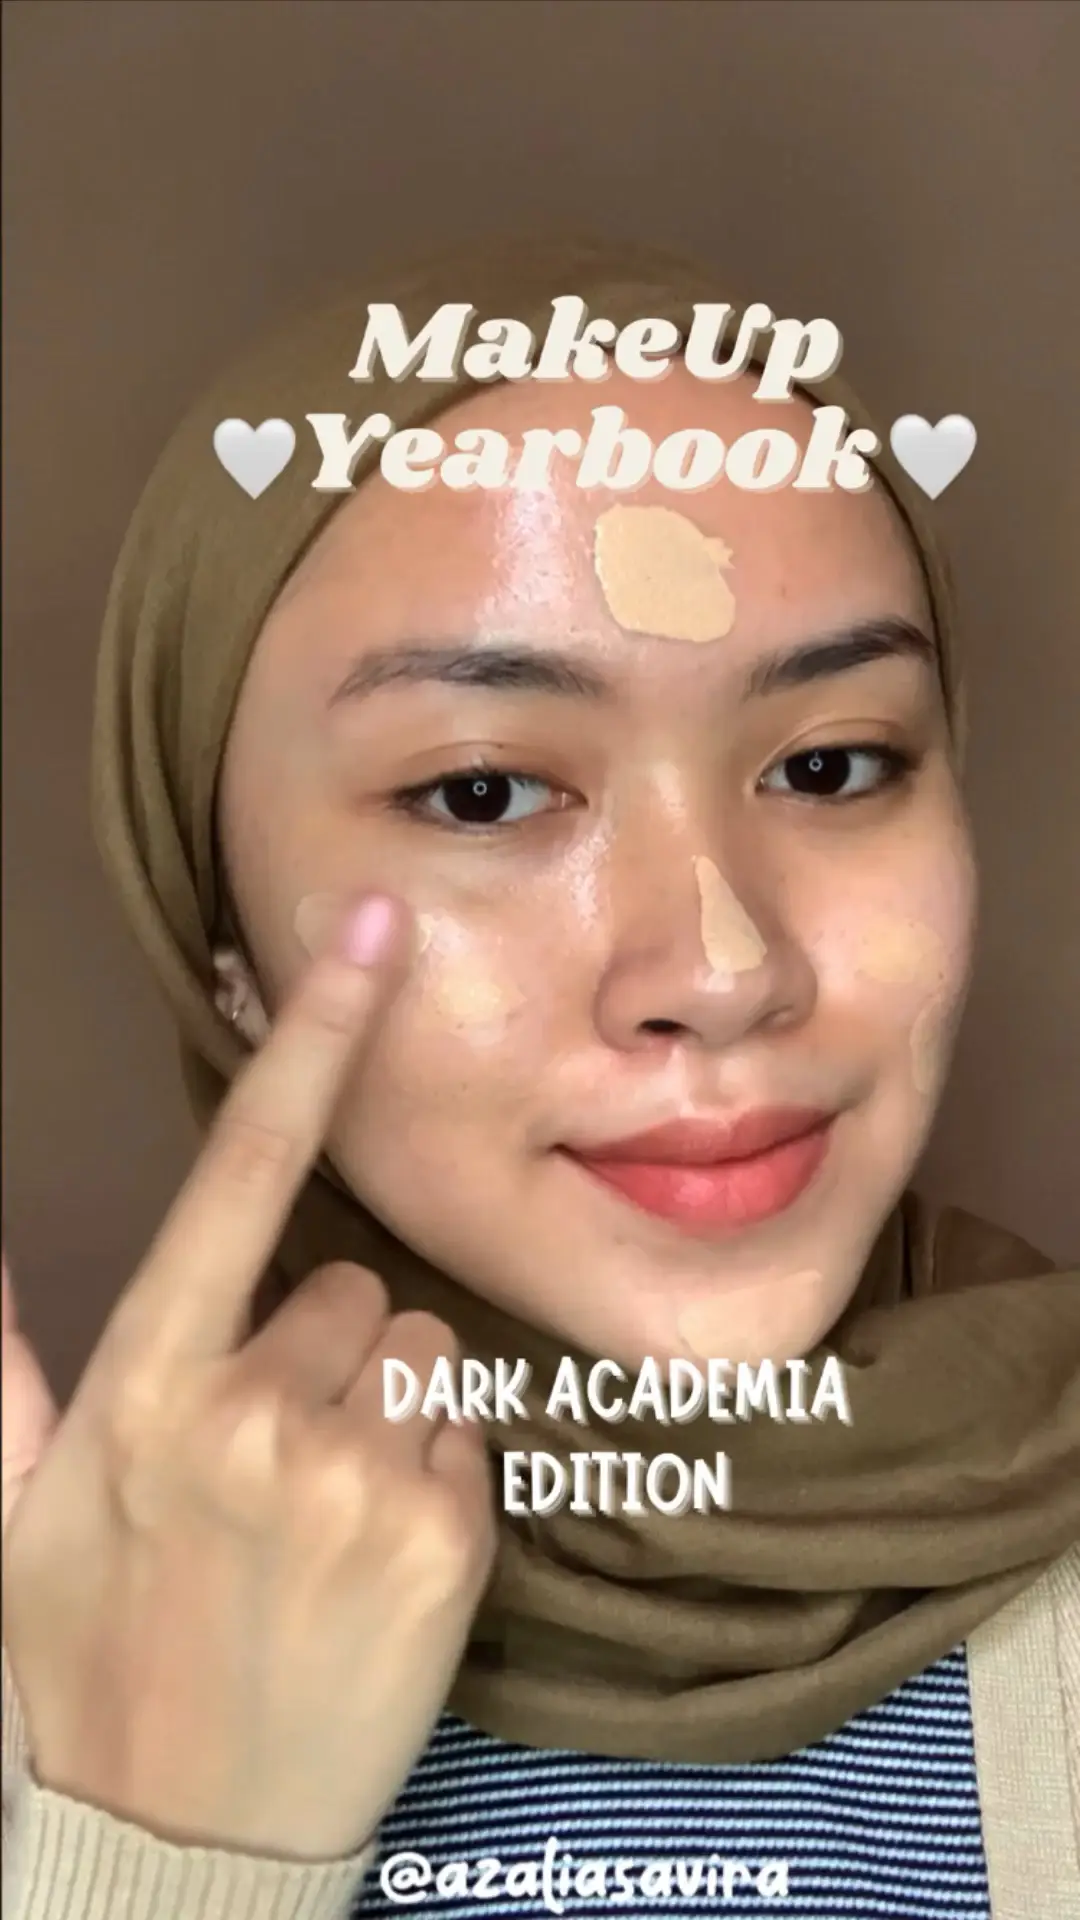 Makeup Yearbook Published By